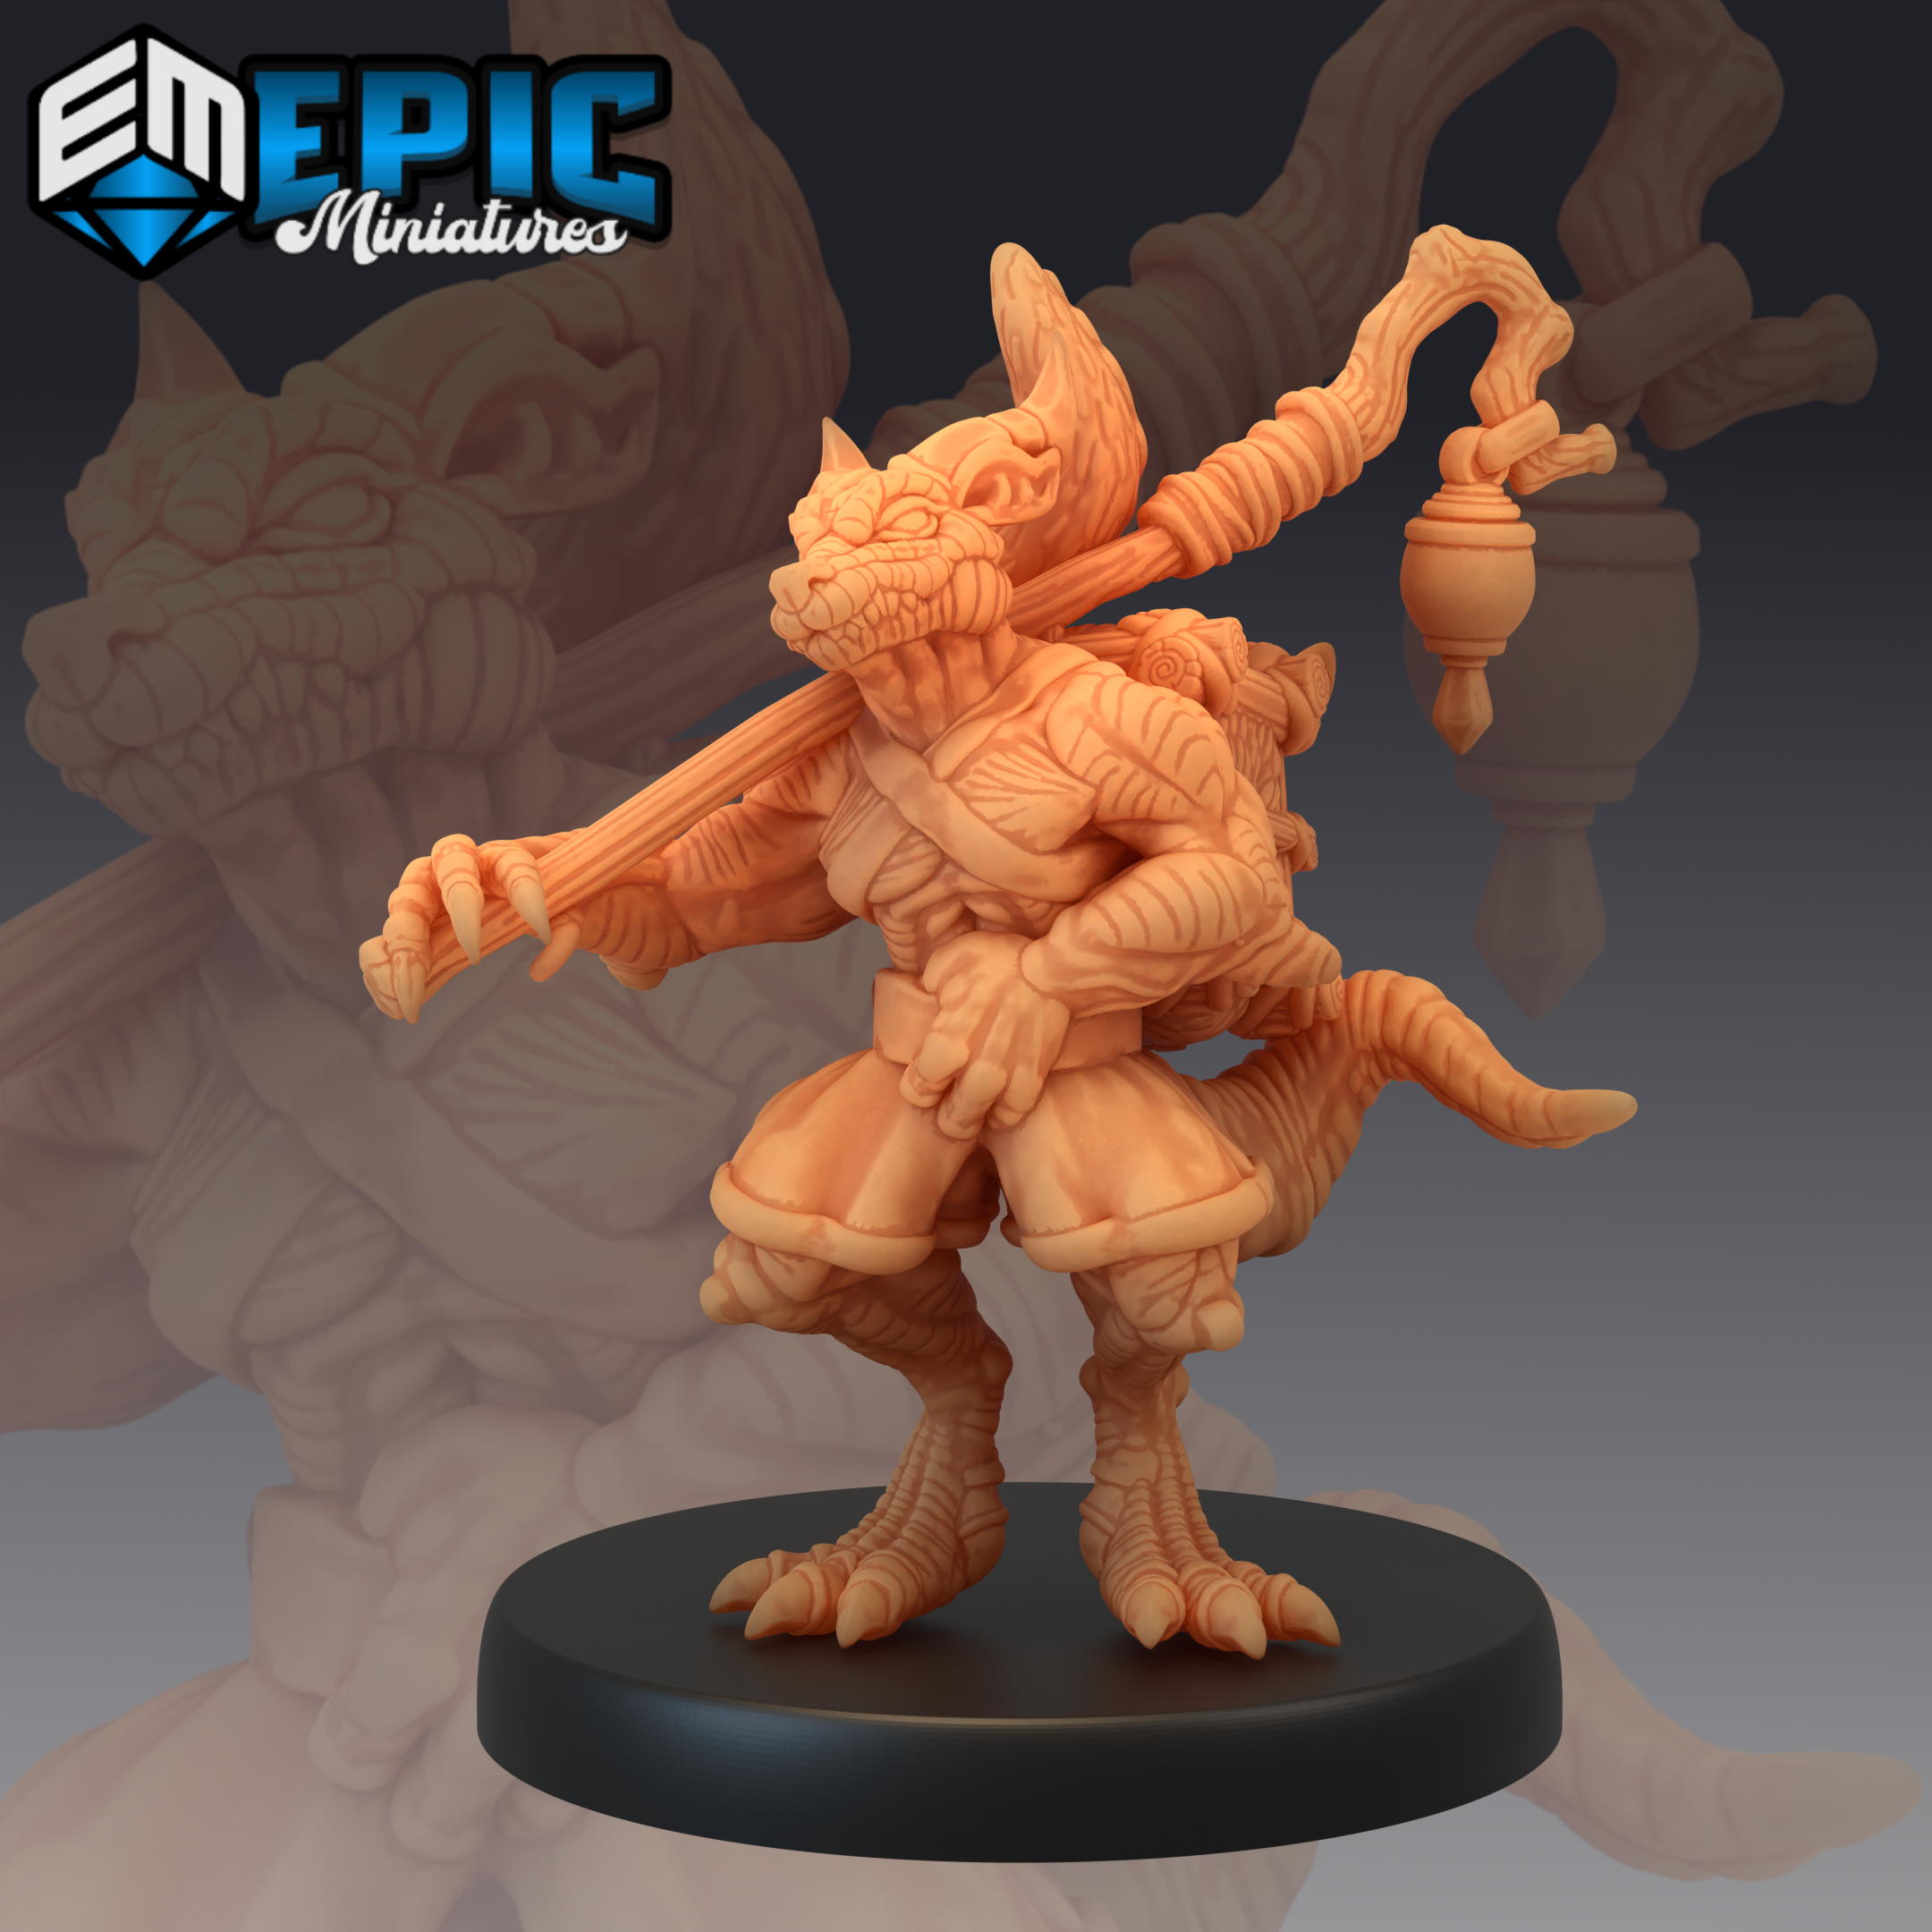 Mythical desert collection by Epic Miniatures